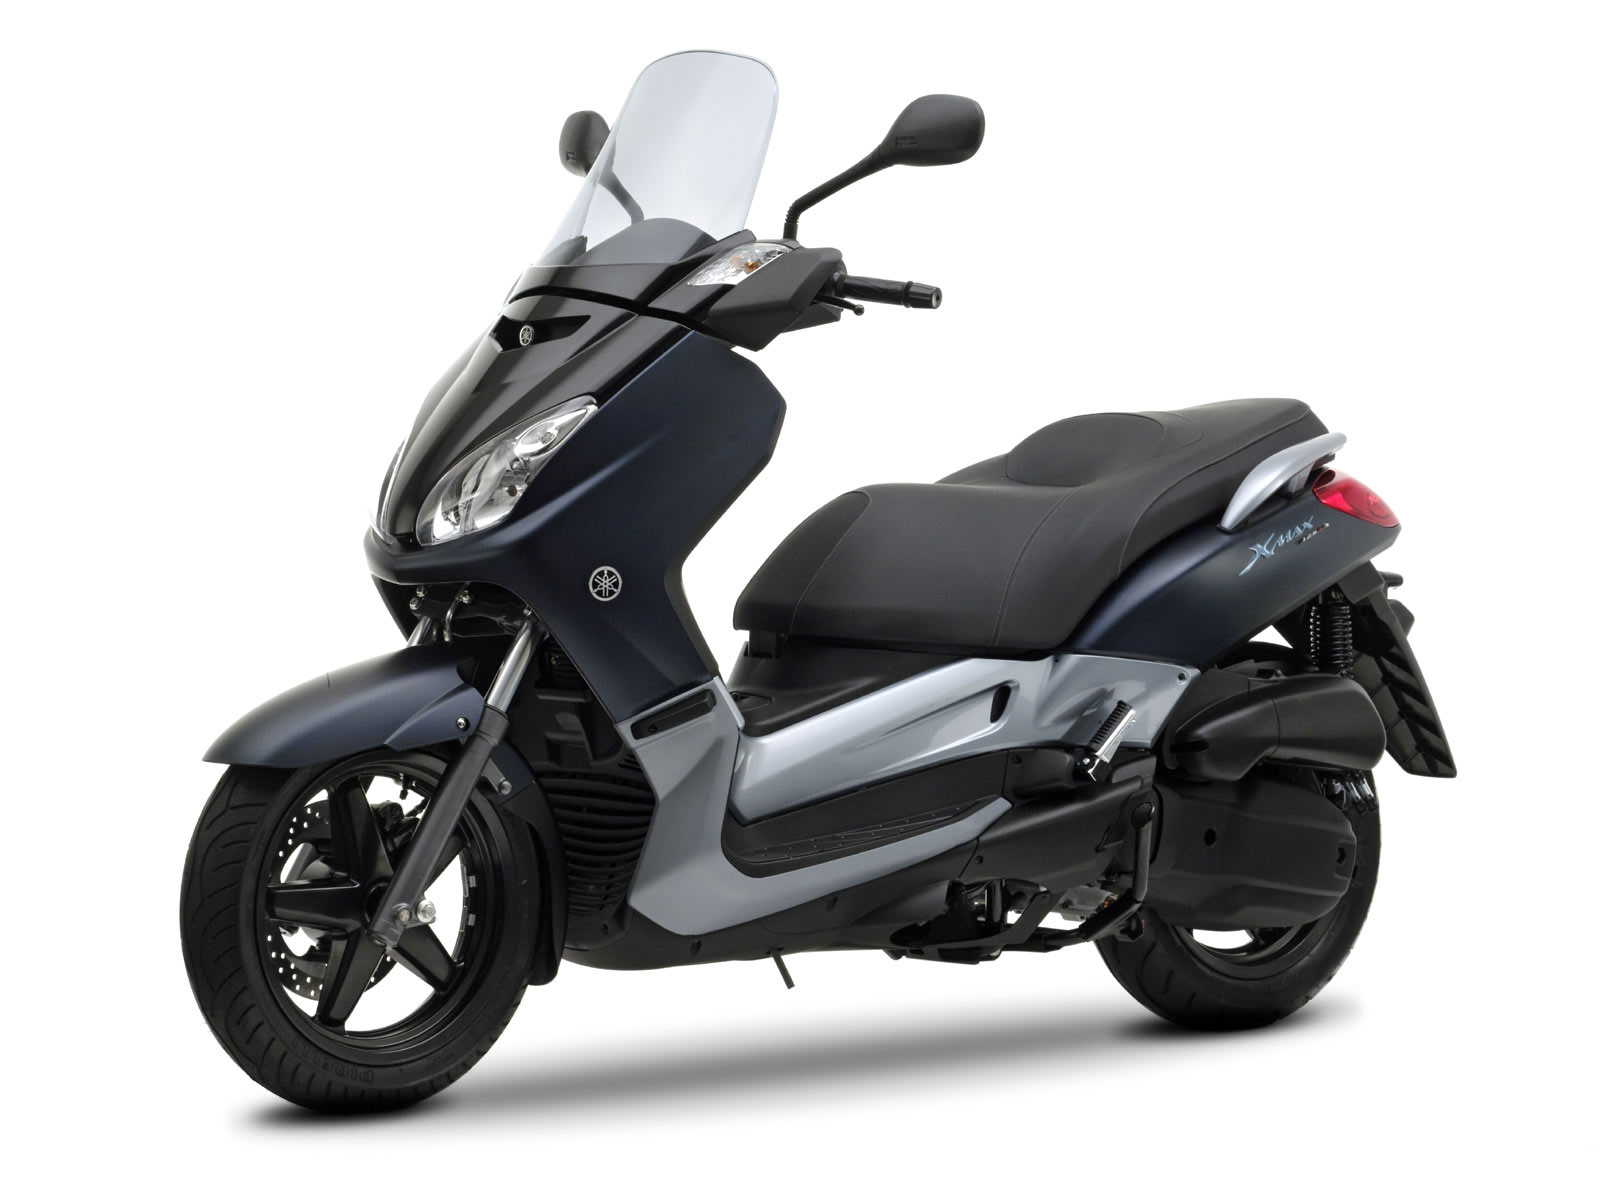 Scooter pictures. 2008 YAMAHA X-Max 125 specifications